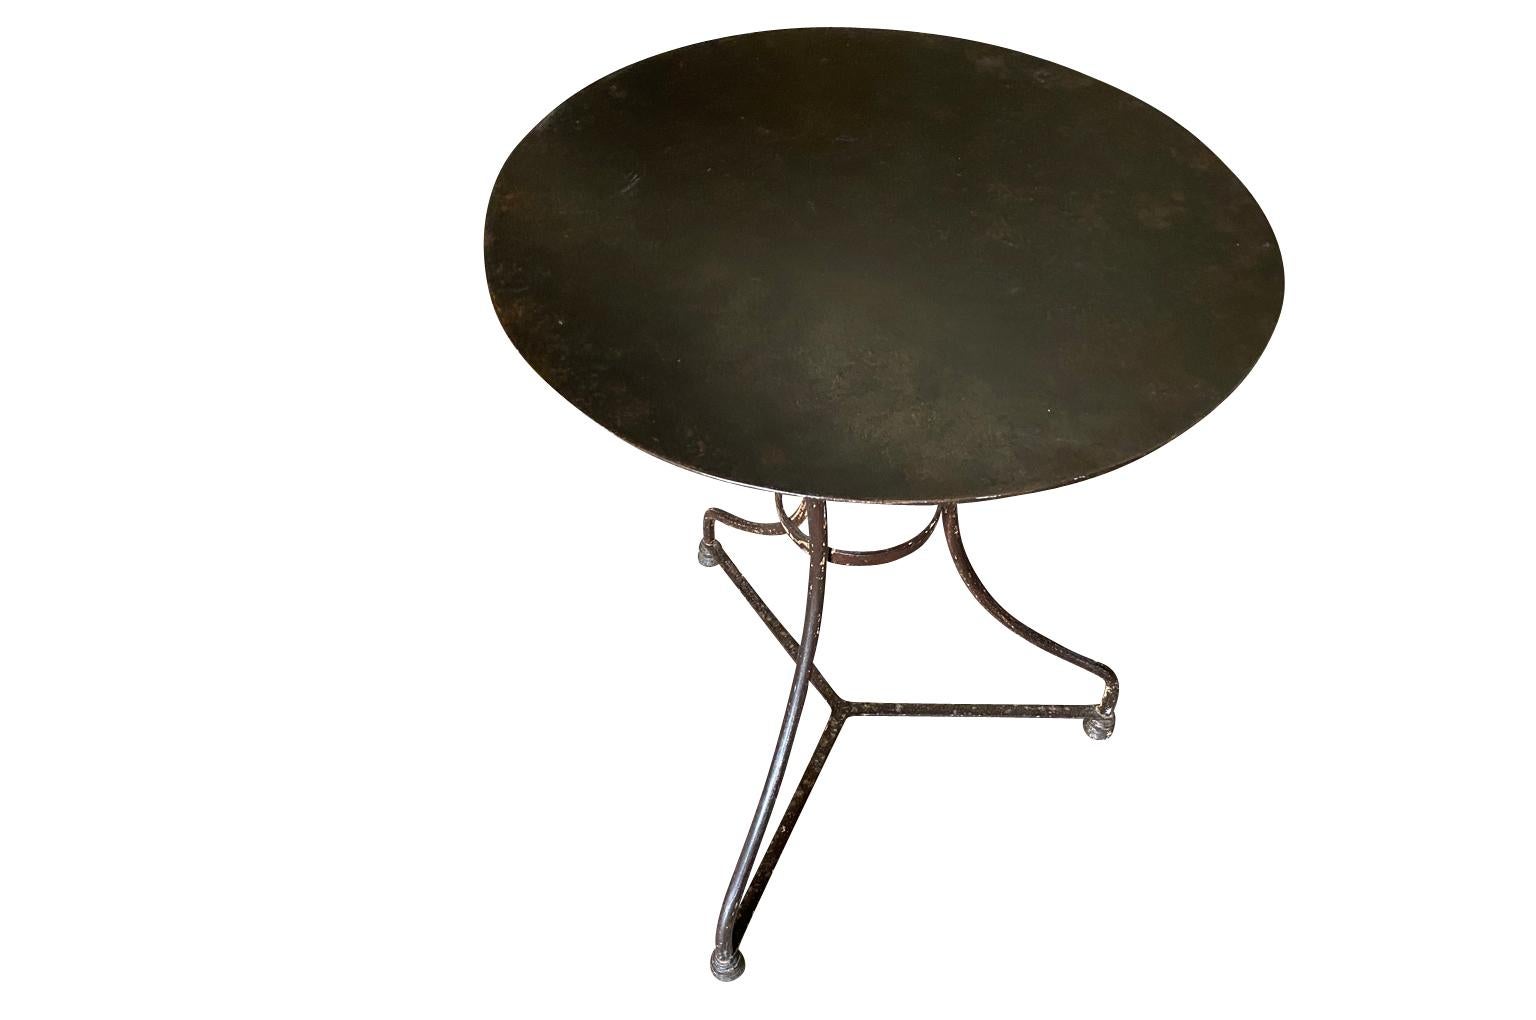 A very charming later 19th century Bistro Table from the South of France.  Soundly constructed from painted iron with a wonderful patina.  Perfect for any interior or garden.